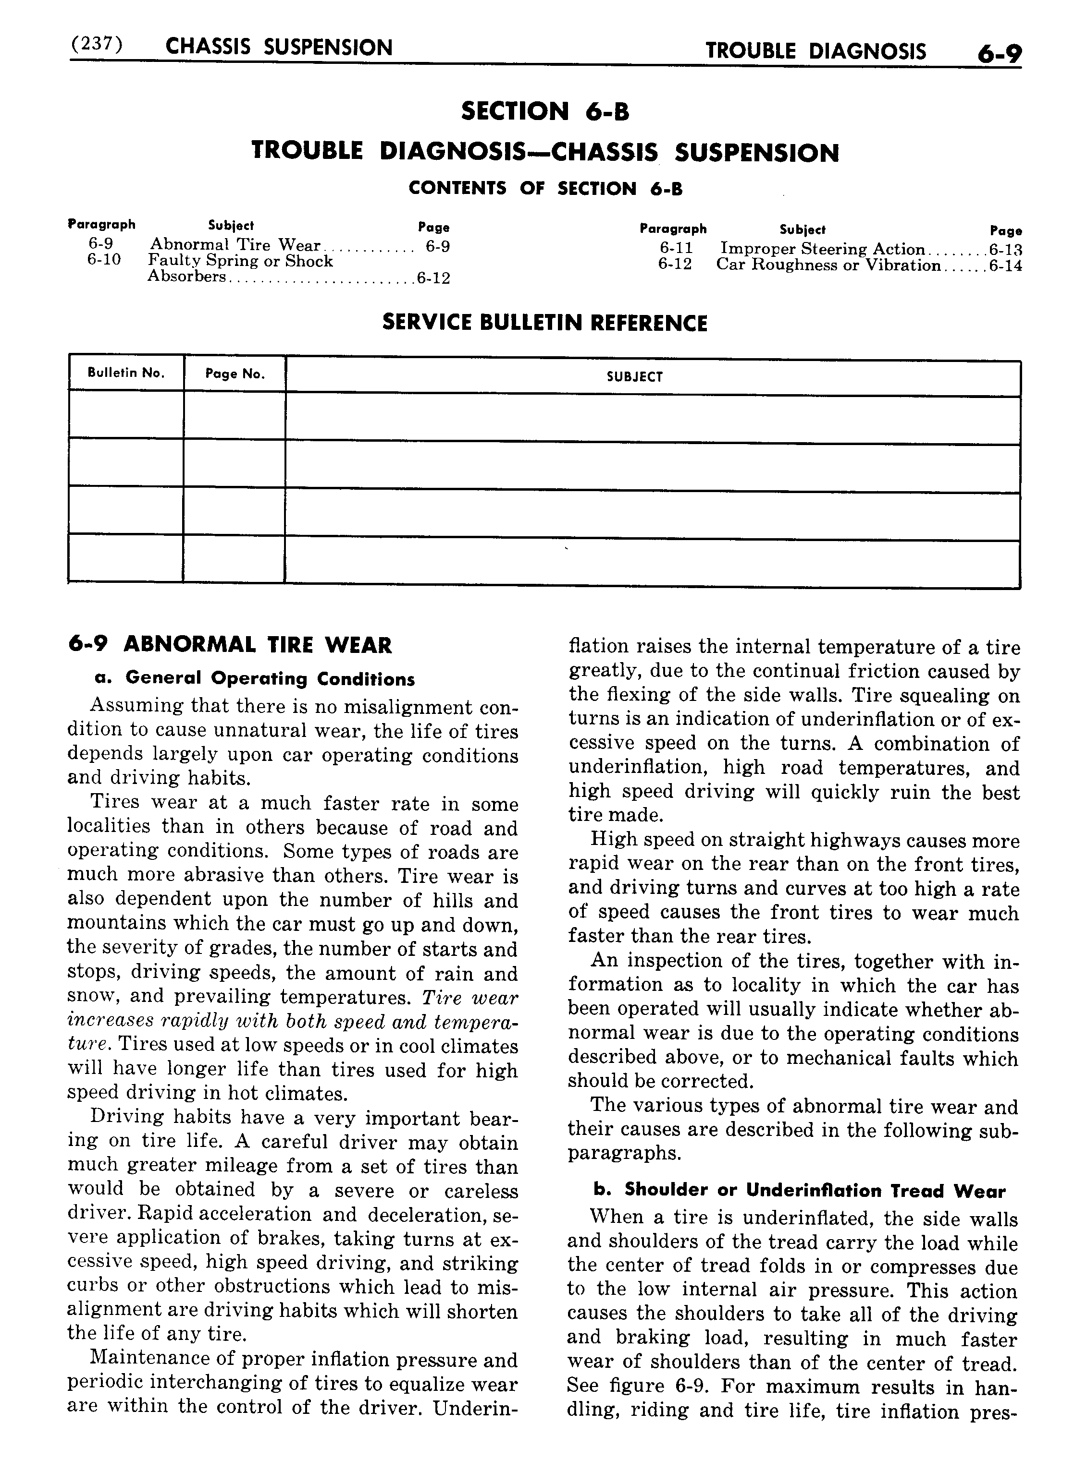 n_07 1951 Buick Shop Manual - Chassis Suspension-009-009.jpg